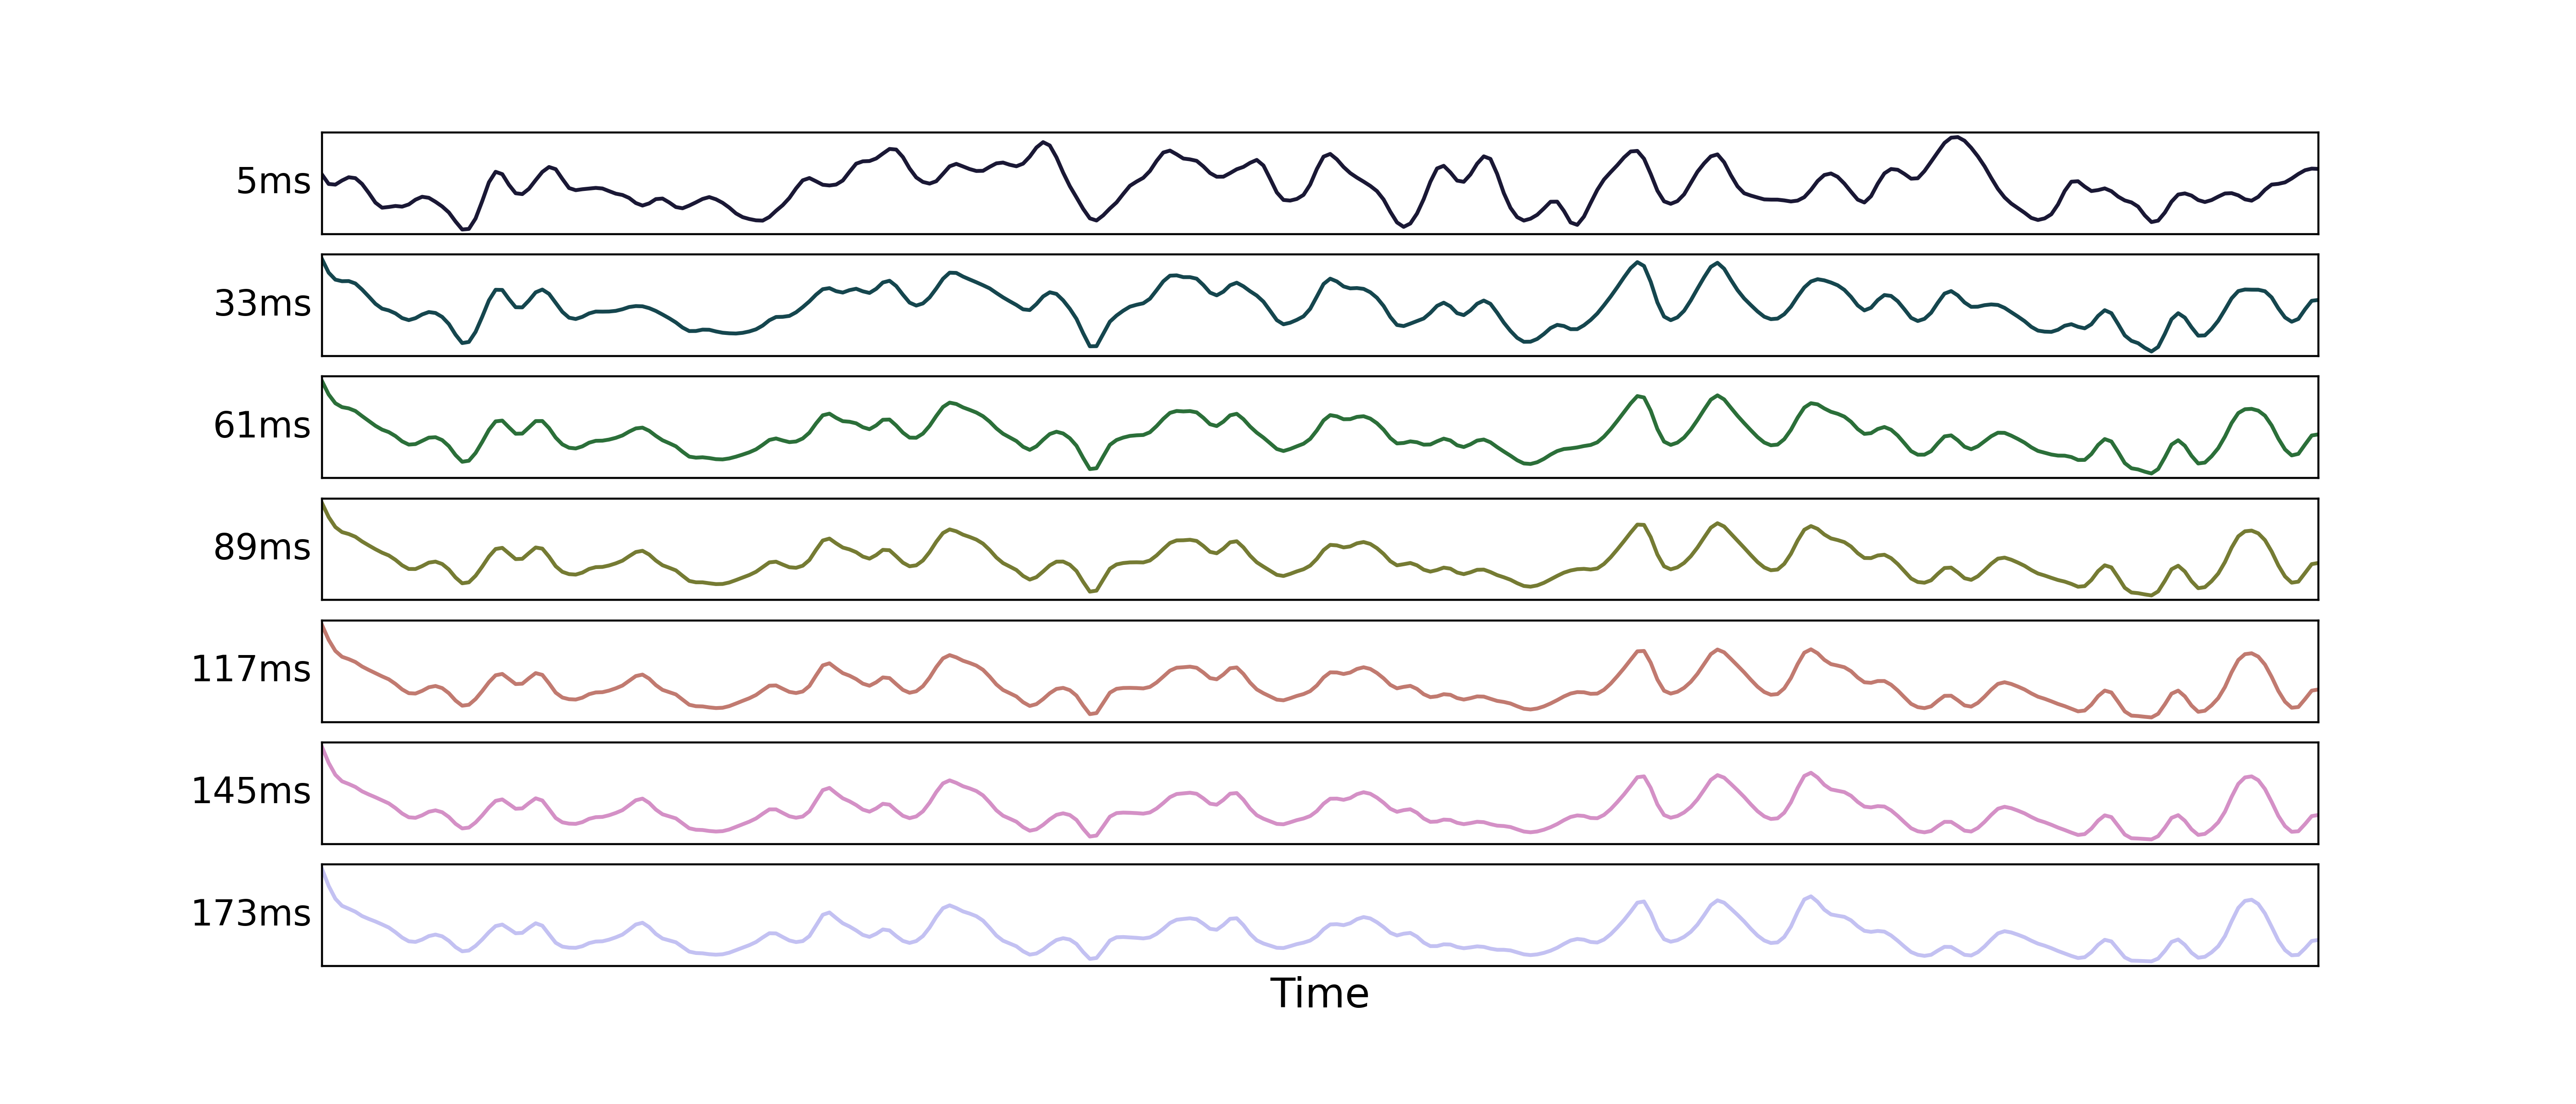 _images/b04_echo_timeseries.png